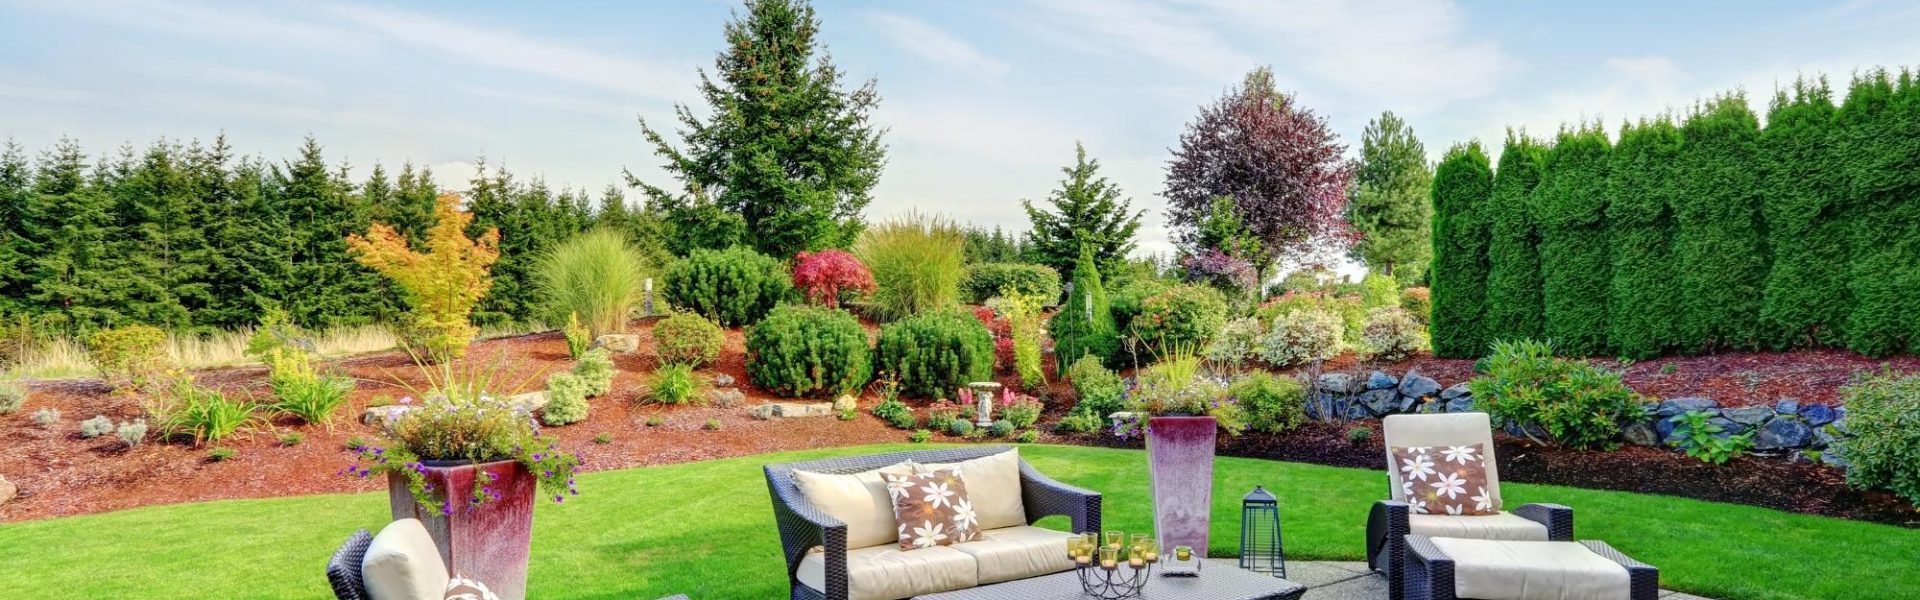 Time for outdoor renovation or a Perfect backyard remodel?